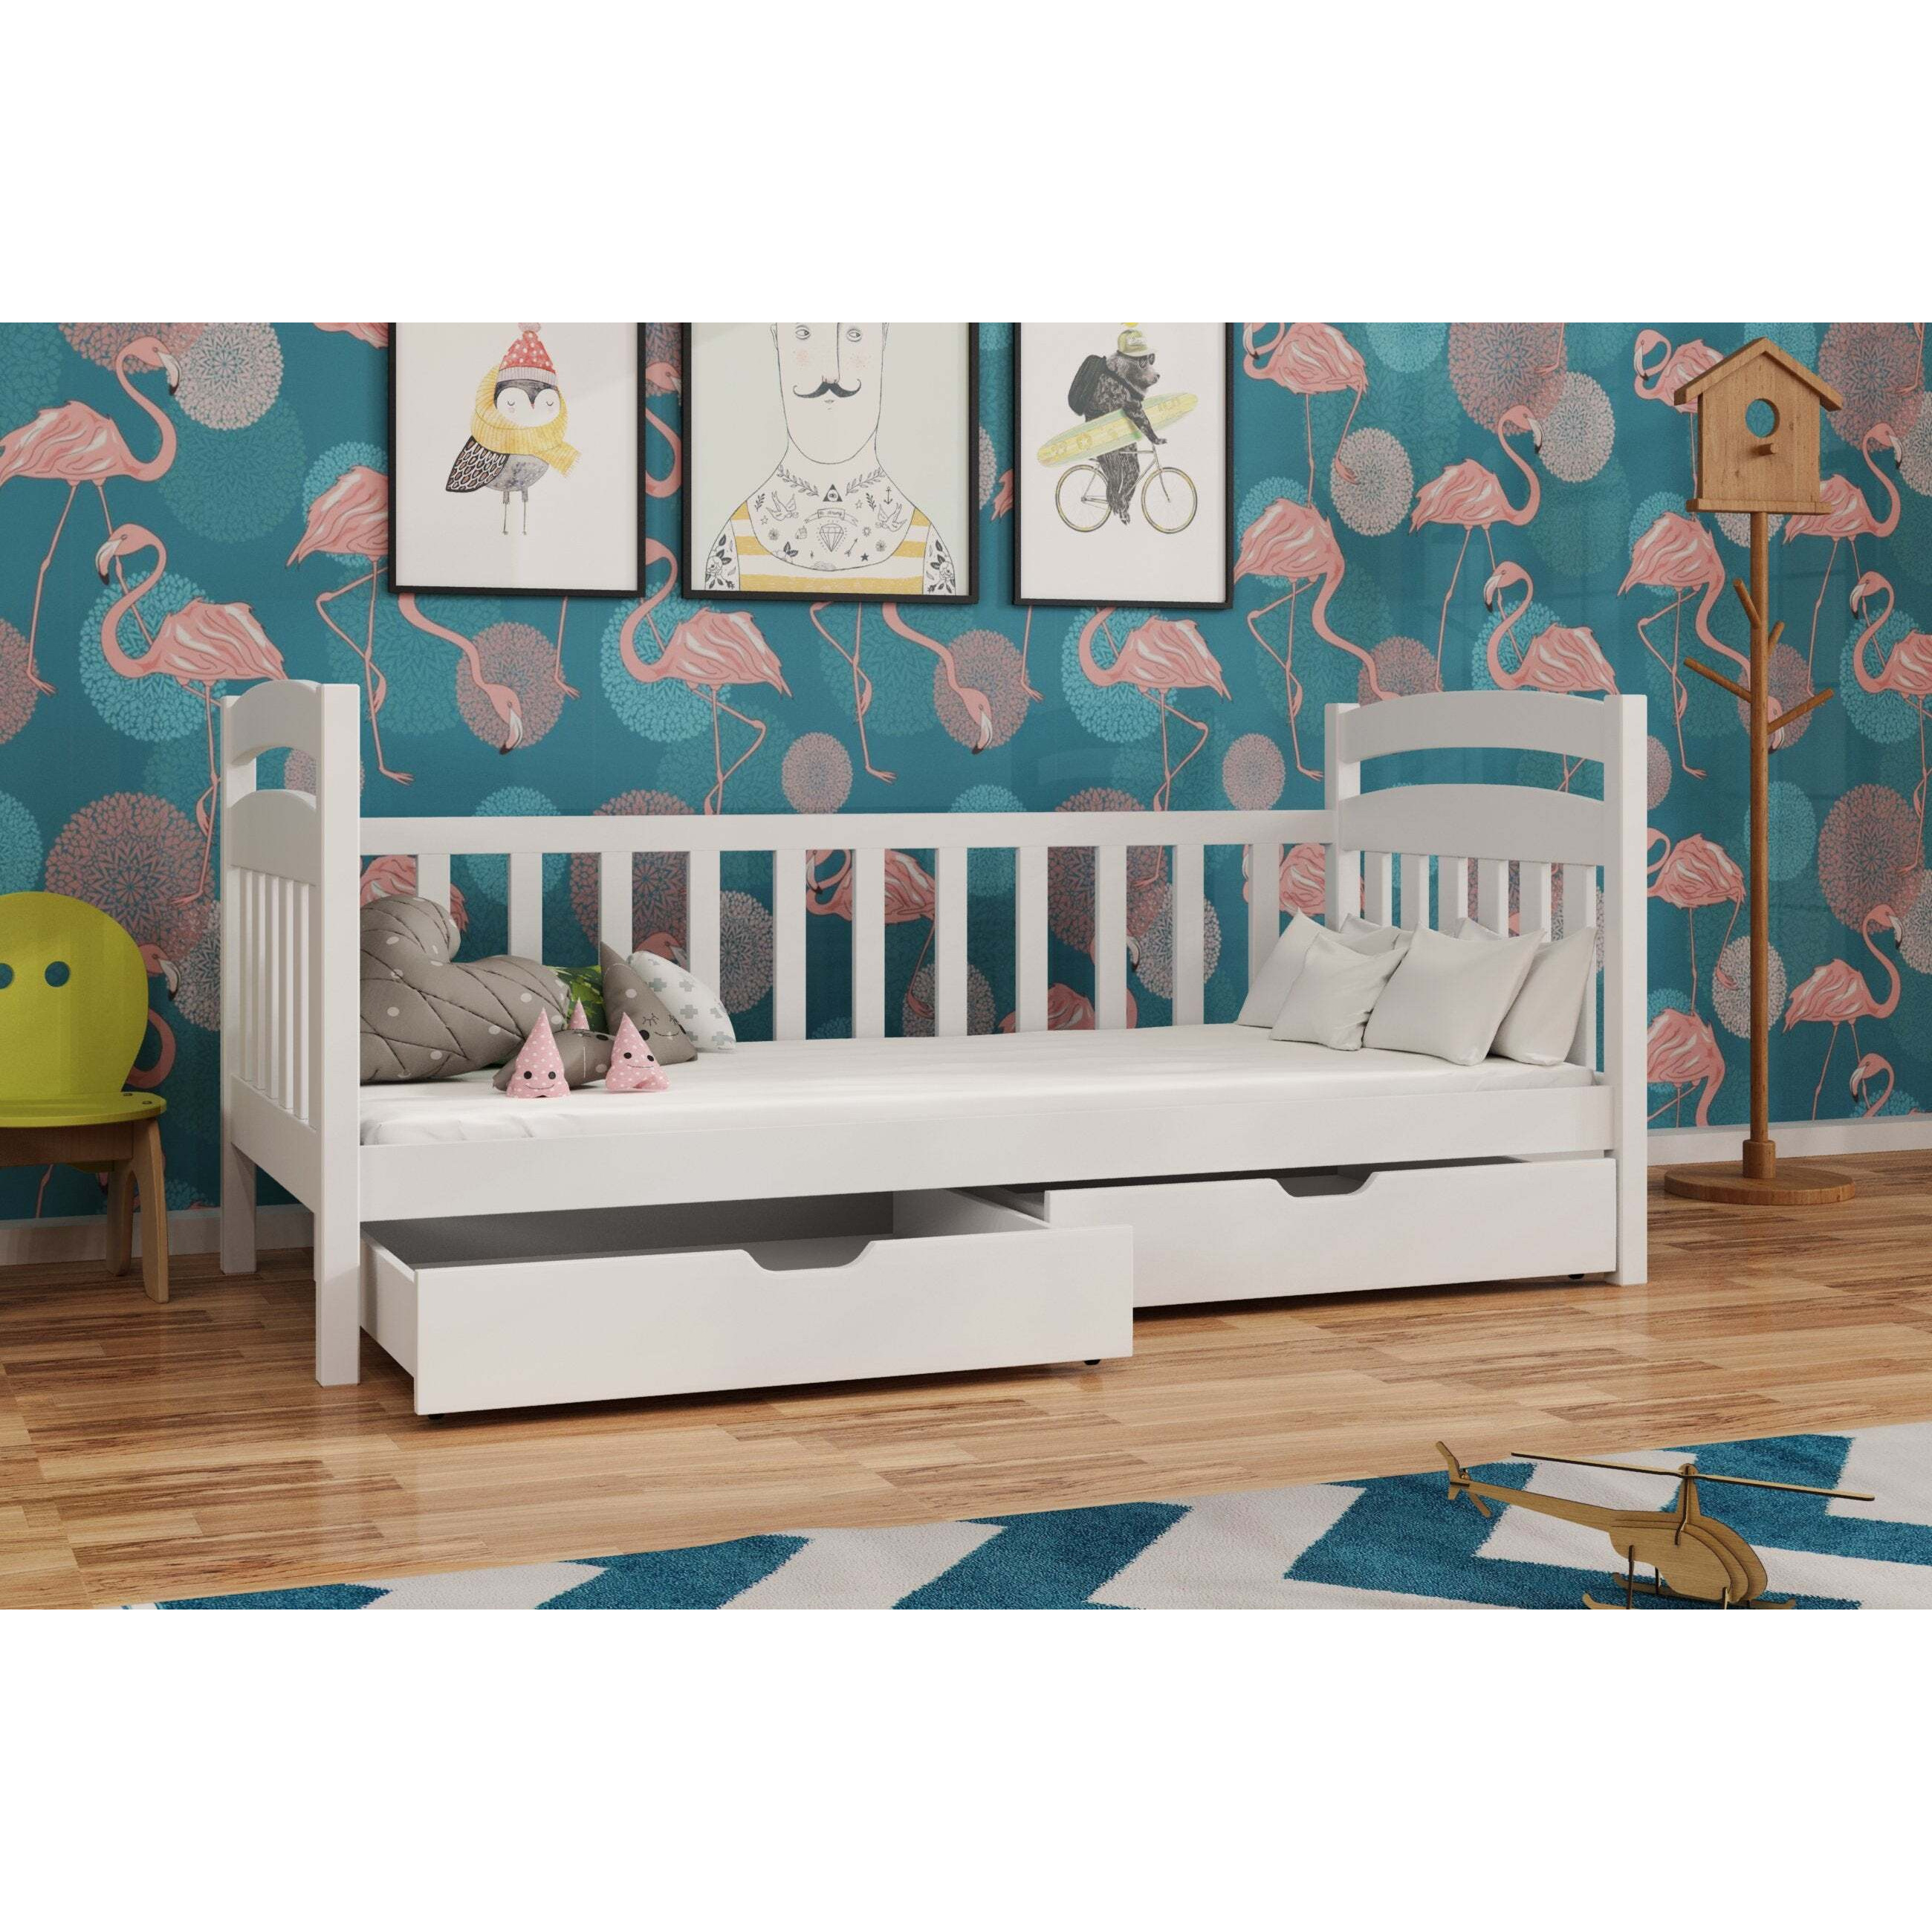 Wooden Single Bed Tobias with Storage - White Matt Without Mattresses - image 1